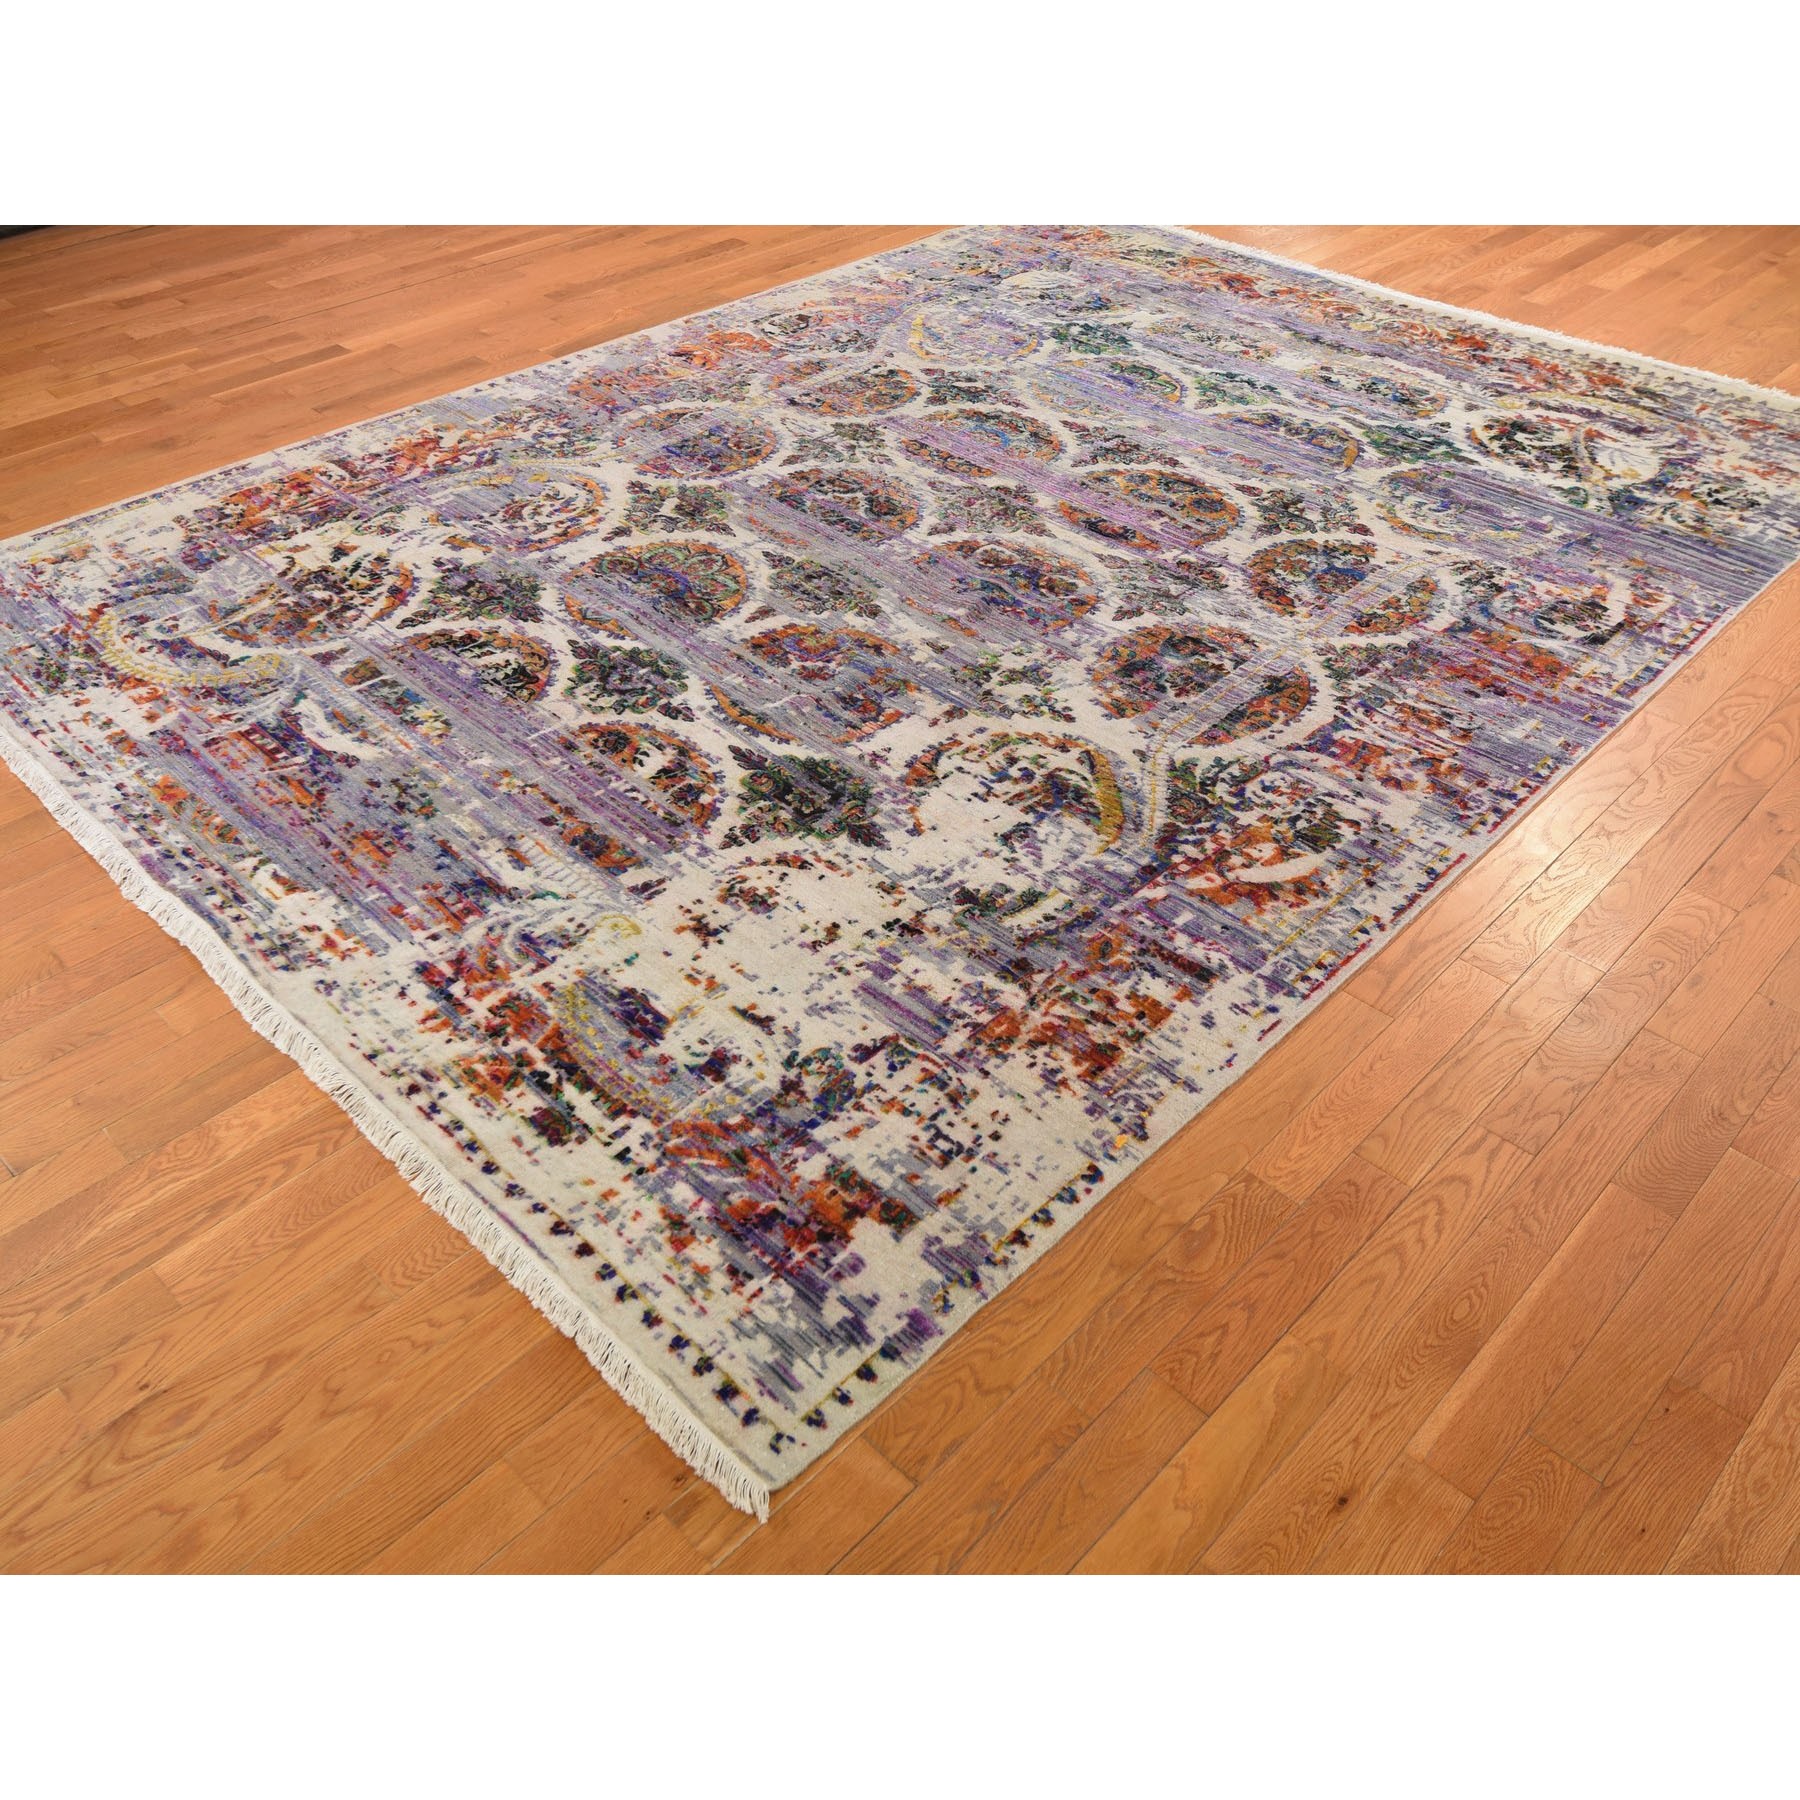 9-x12- ERASED ROSSETS, Colorful Sari Silk With Textured Wool Hand Knotted Oriental Rug 